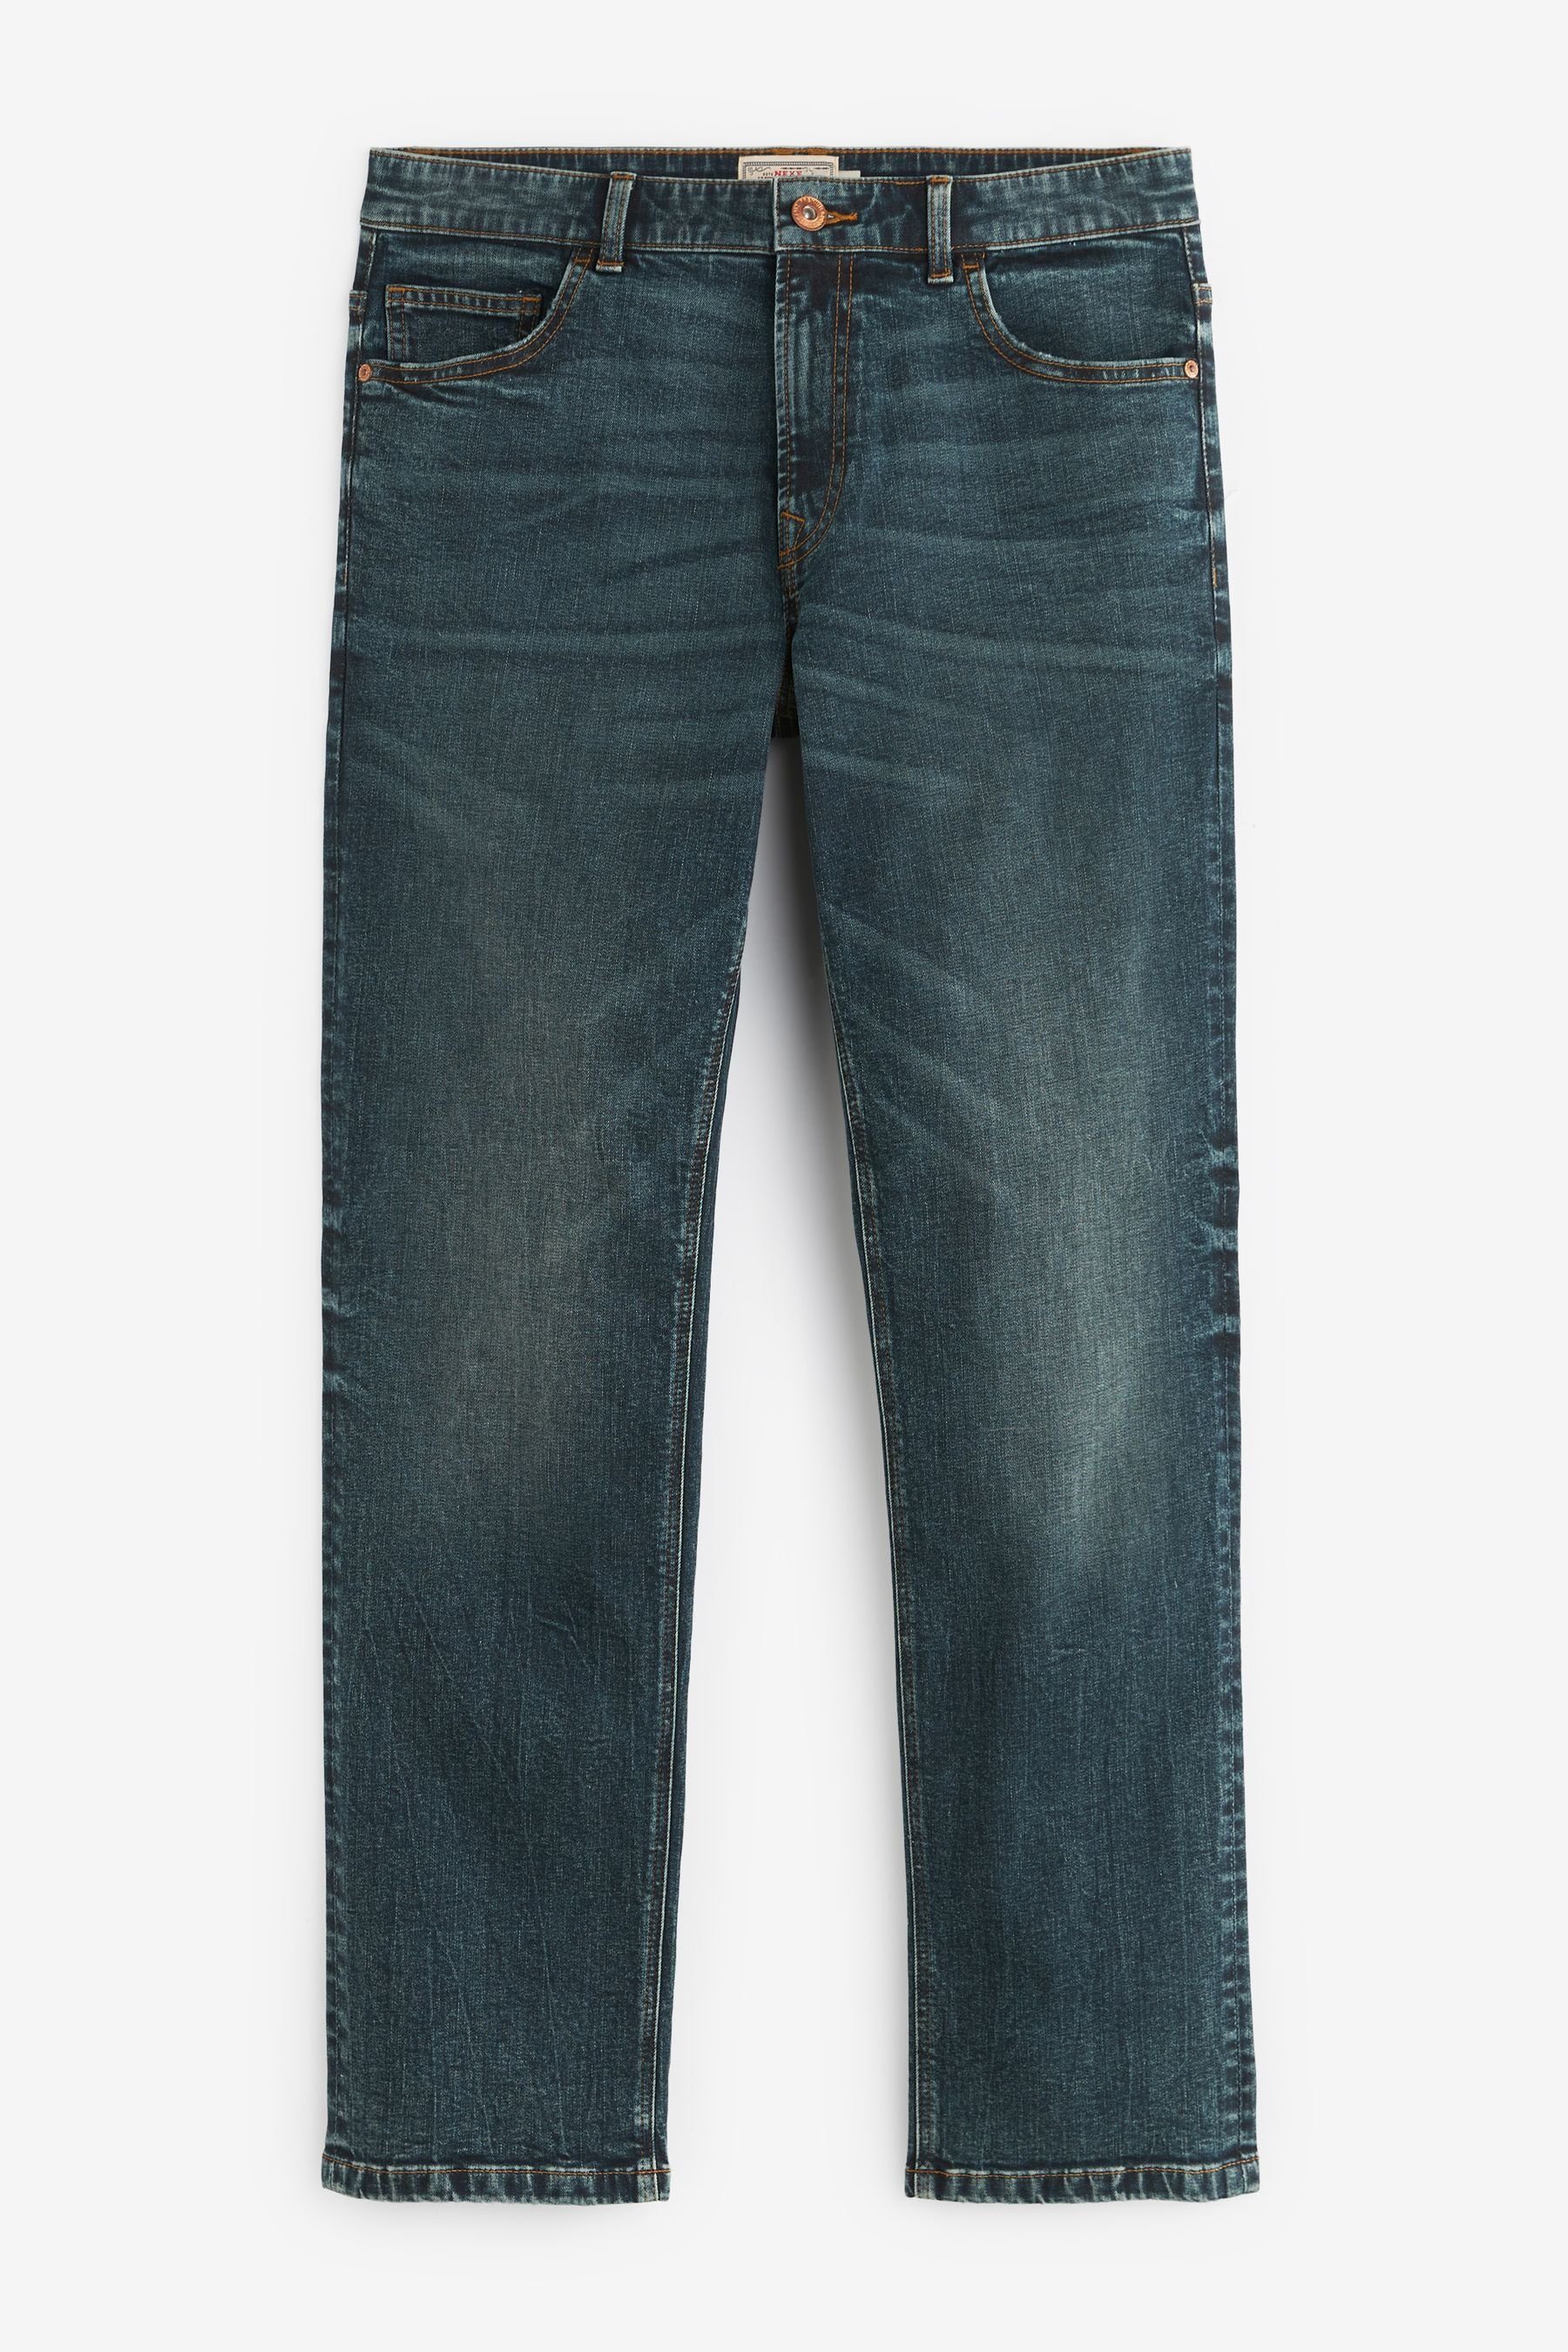 Next Straight-Jeans Straight Fit Stretch-Jeans im Vintage-Look (1-tlg) Mid Tint